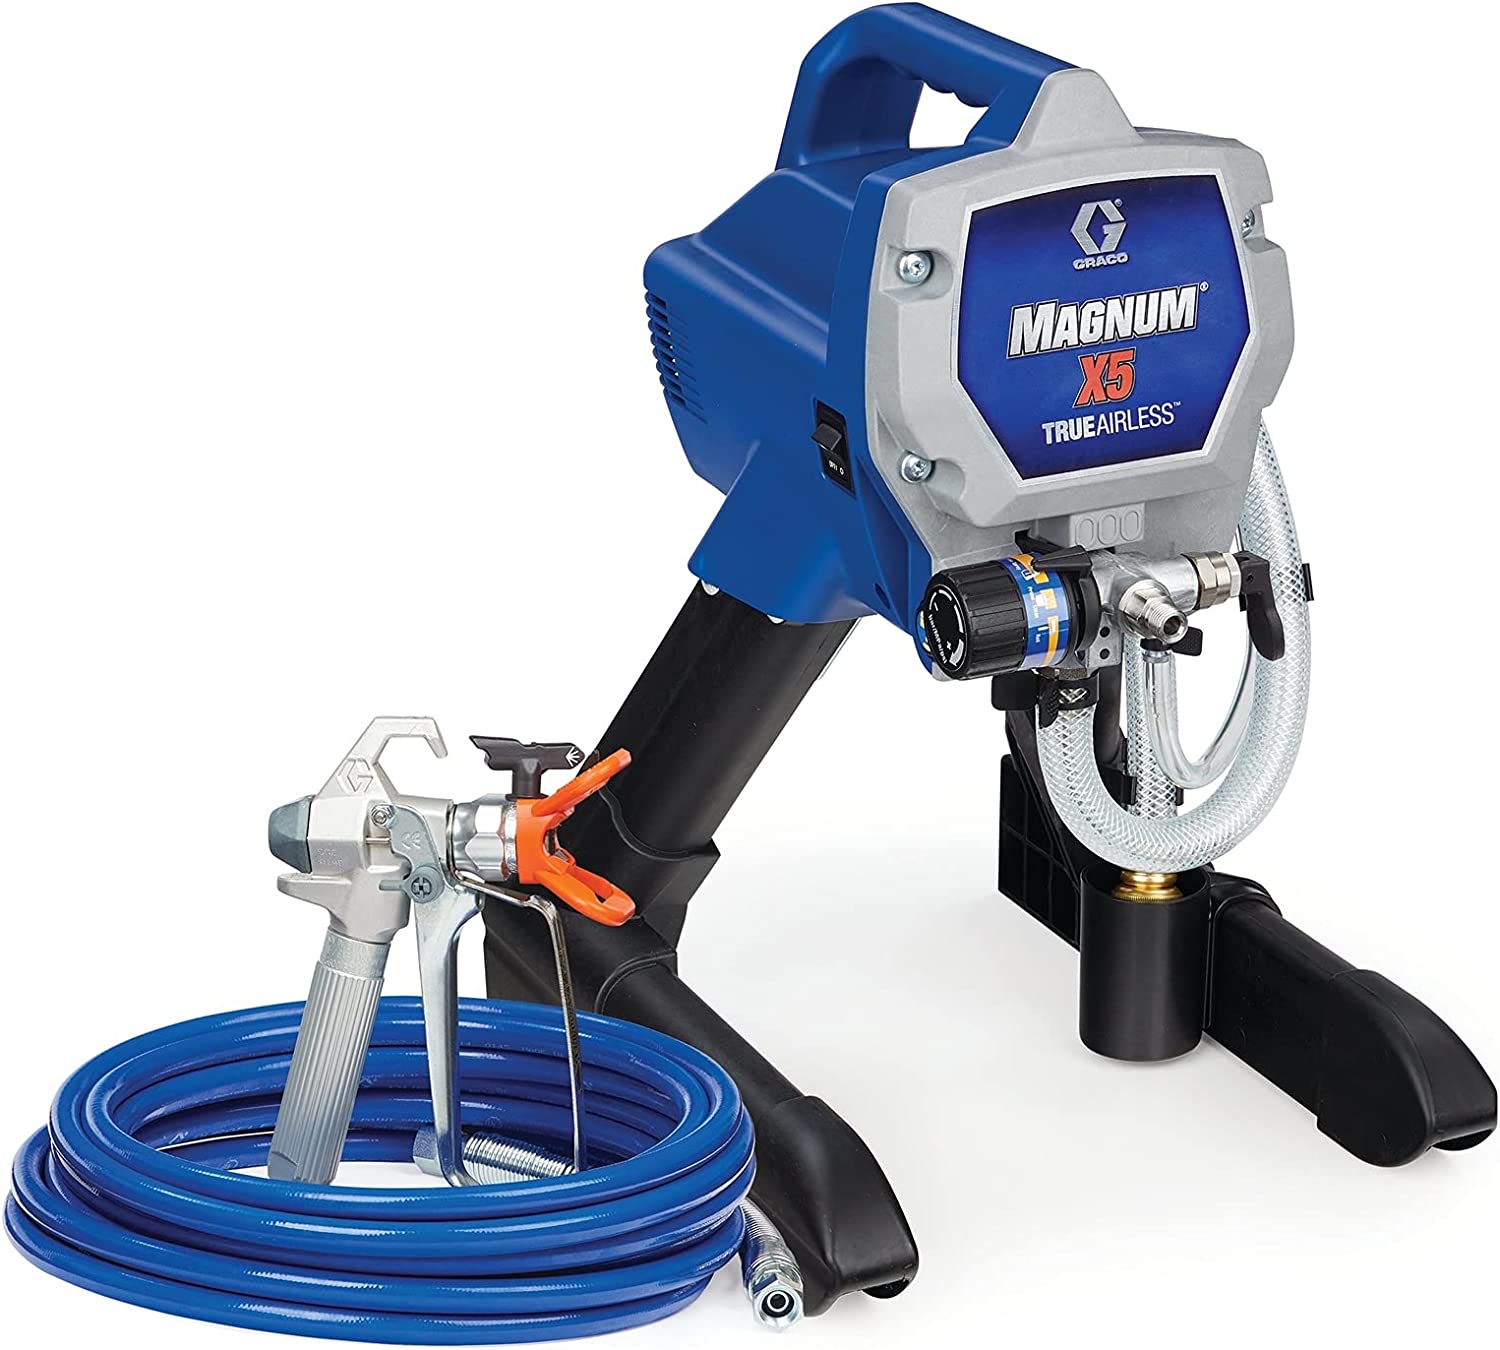 Best Graco Sprayer for Home Use